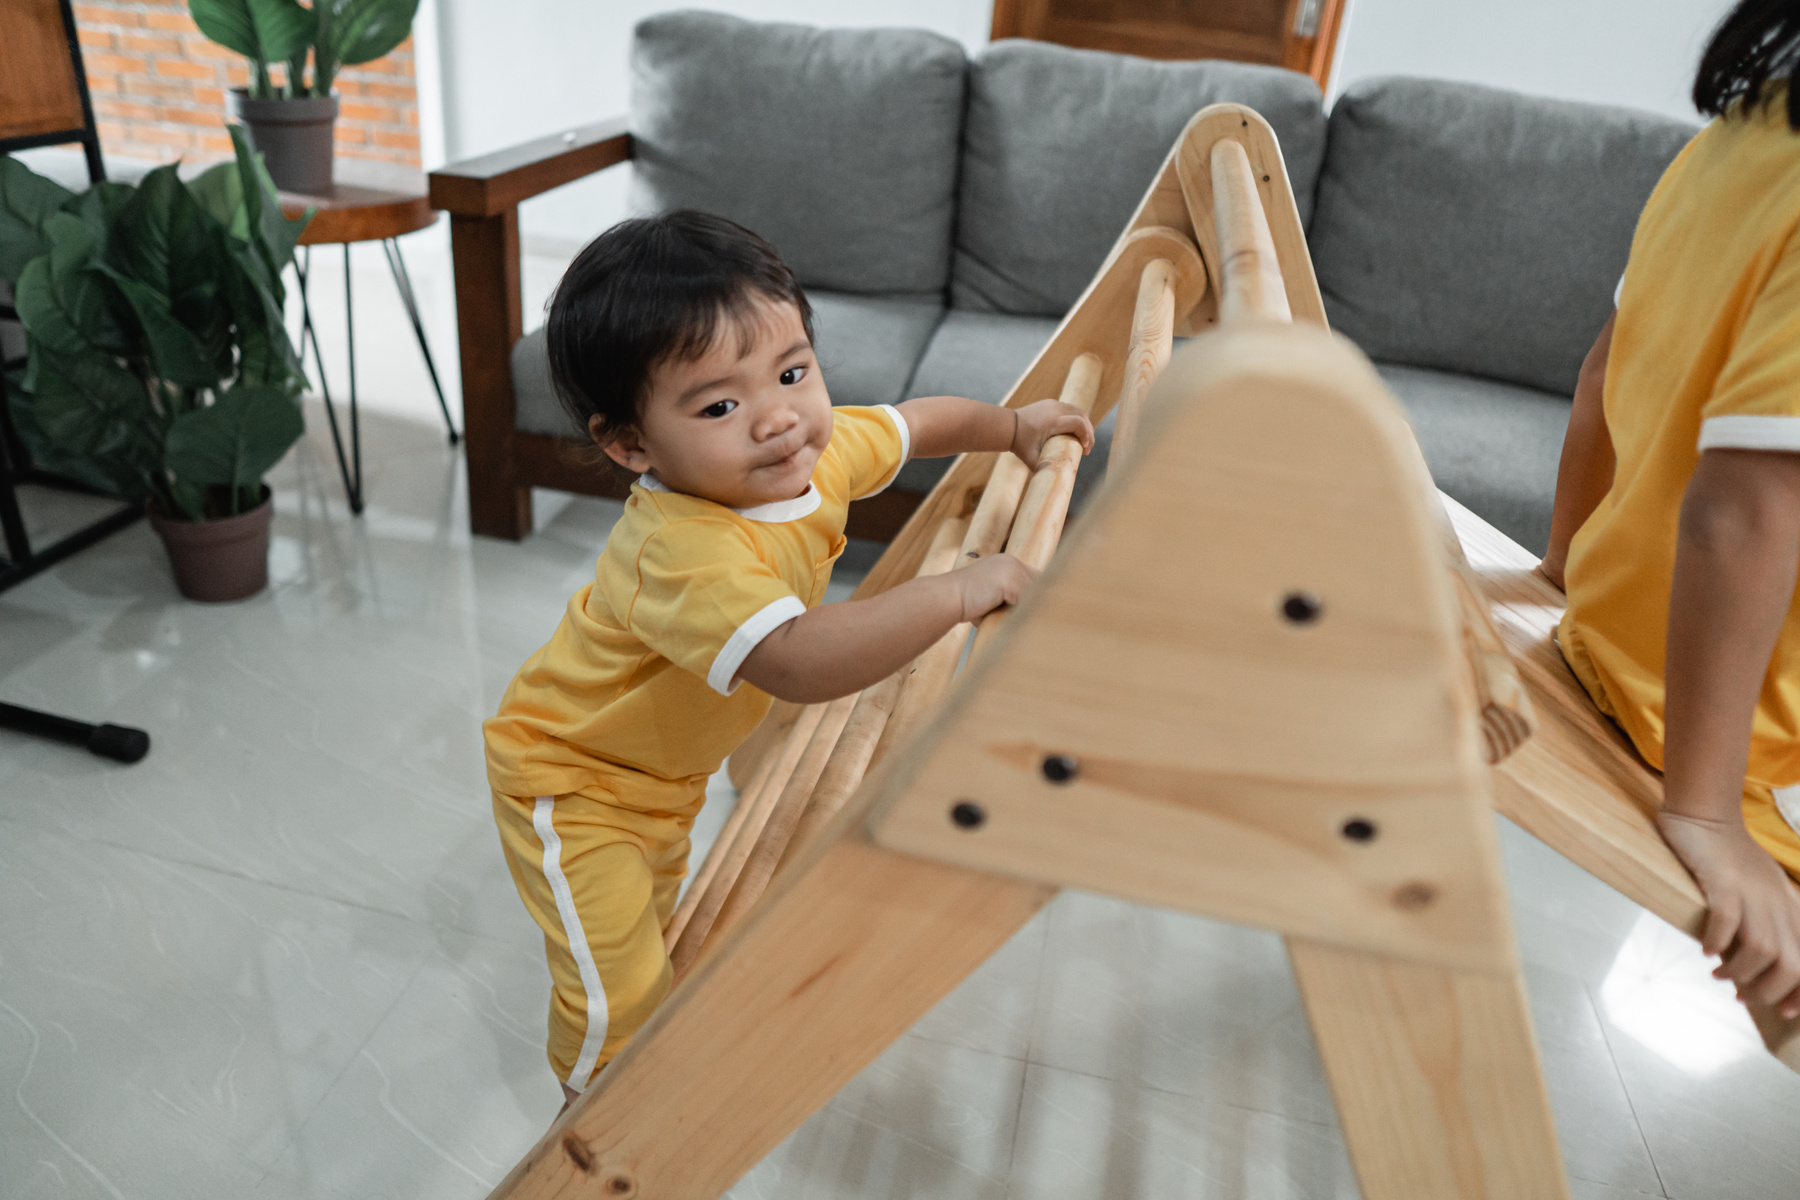 Little Kids Climb on the Pikler Triangle Toy While Playing Together